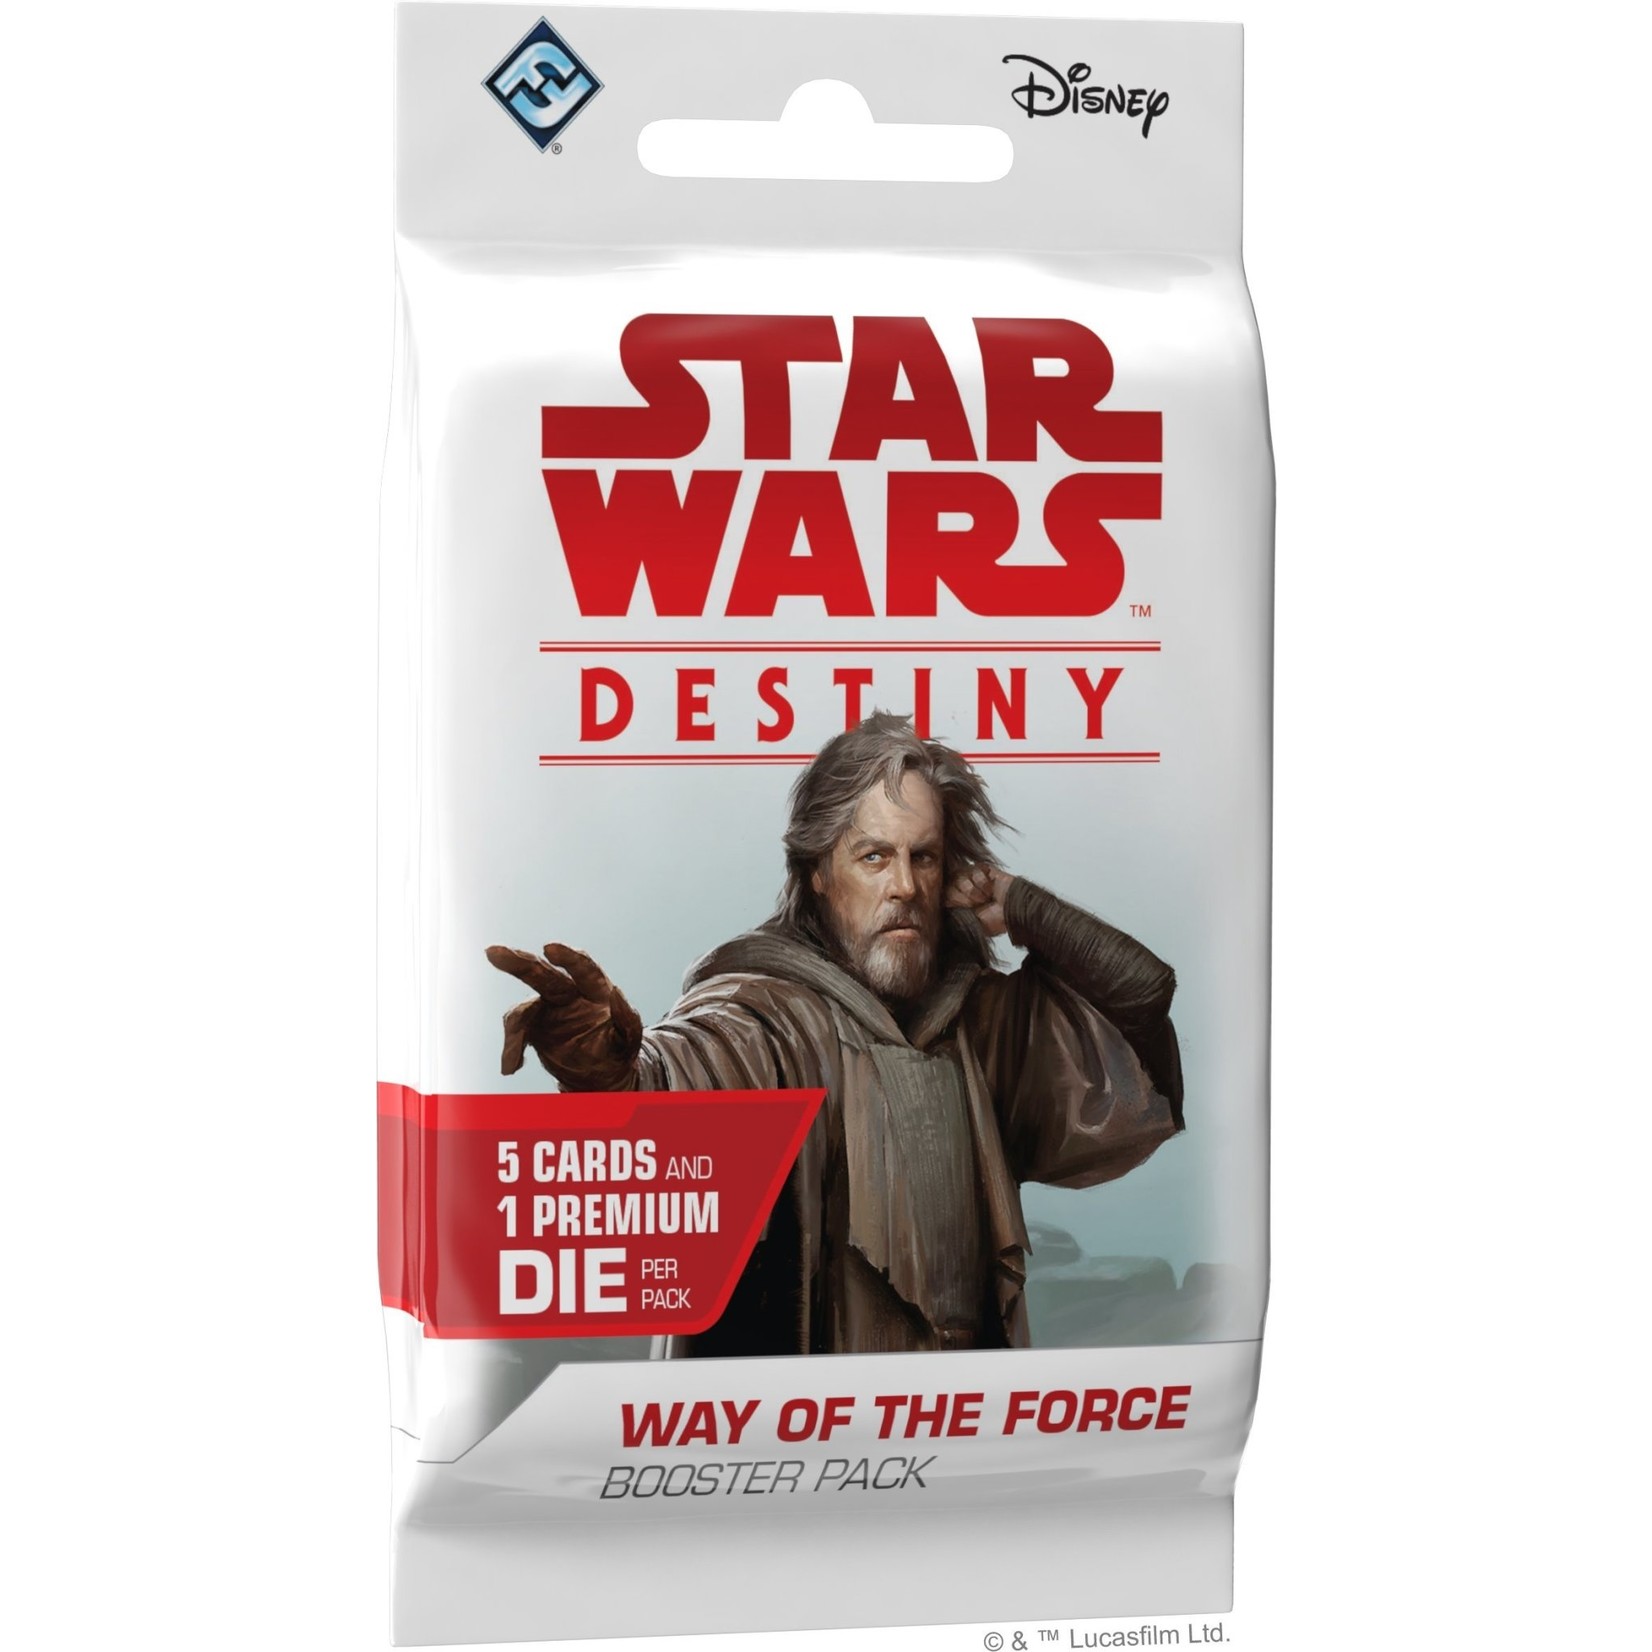 Star Wars Destiny: Way of the Force Booster Pack